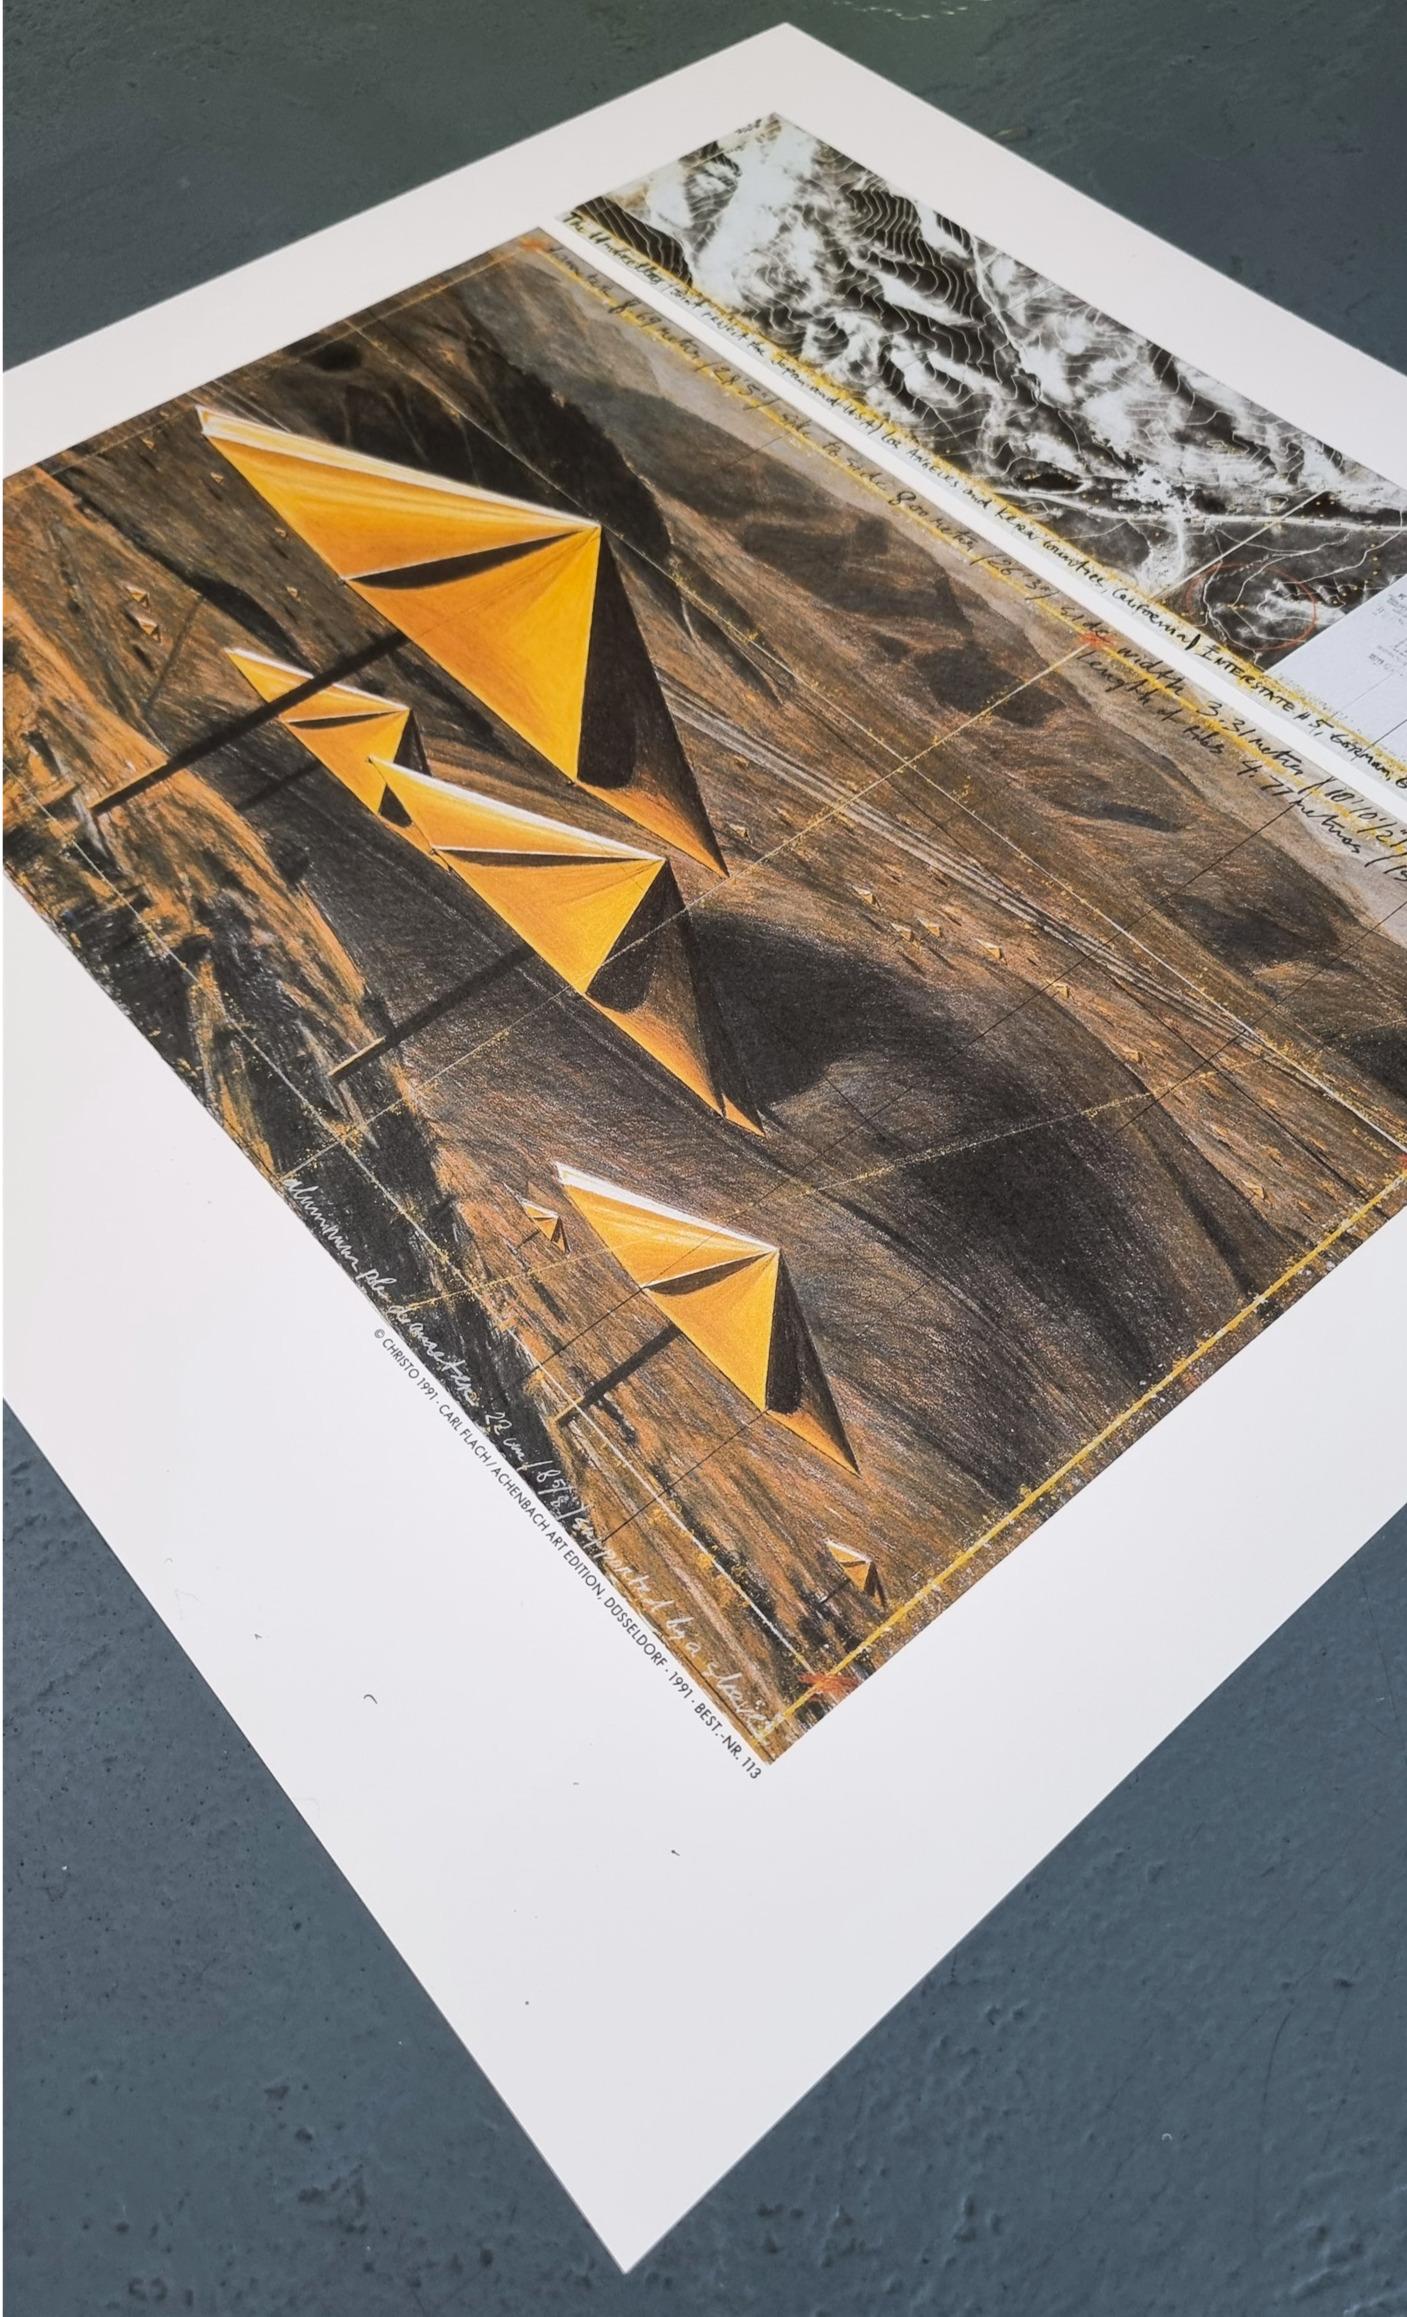 The Umbrellas (Yellow) - Modern Print by Christo and Jeanne-Claude